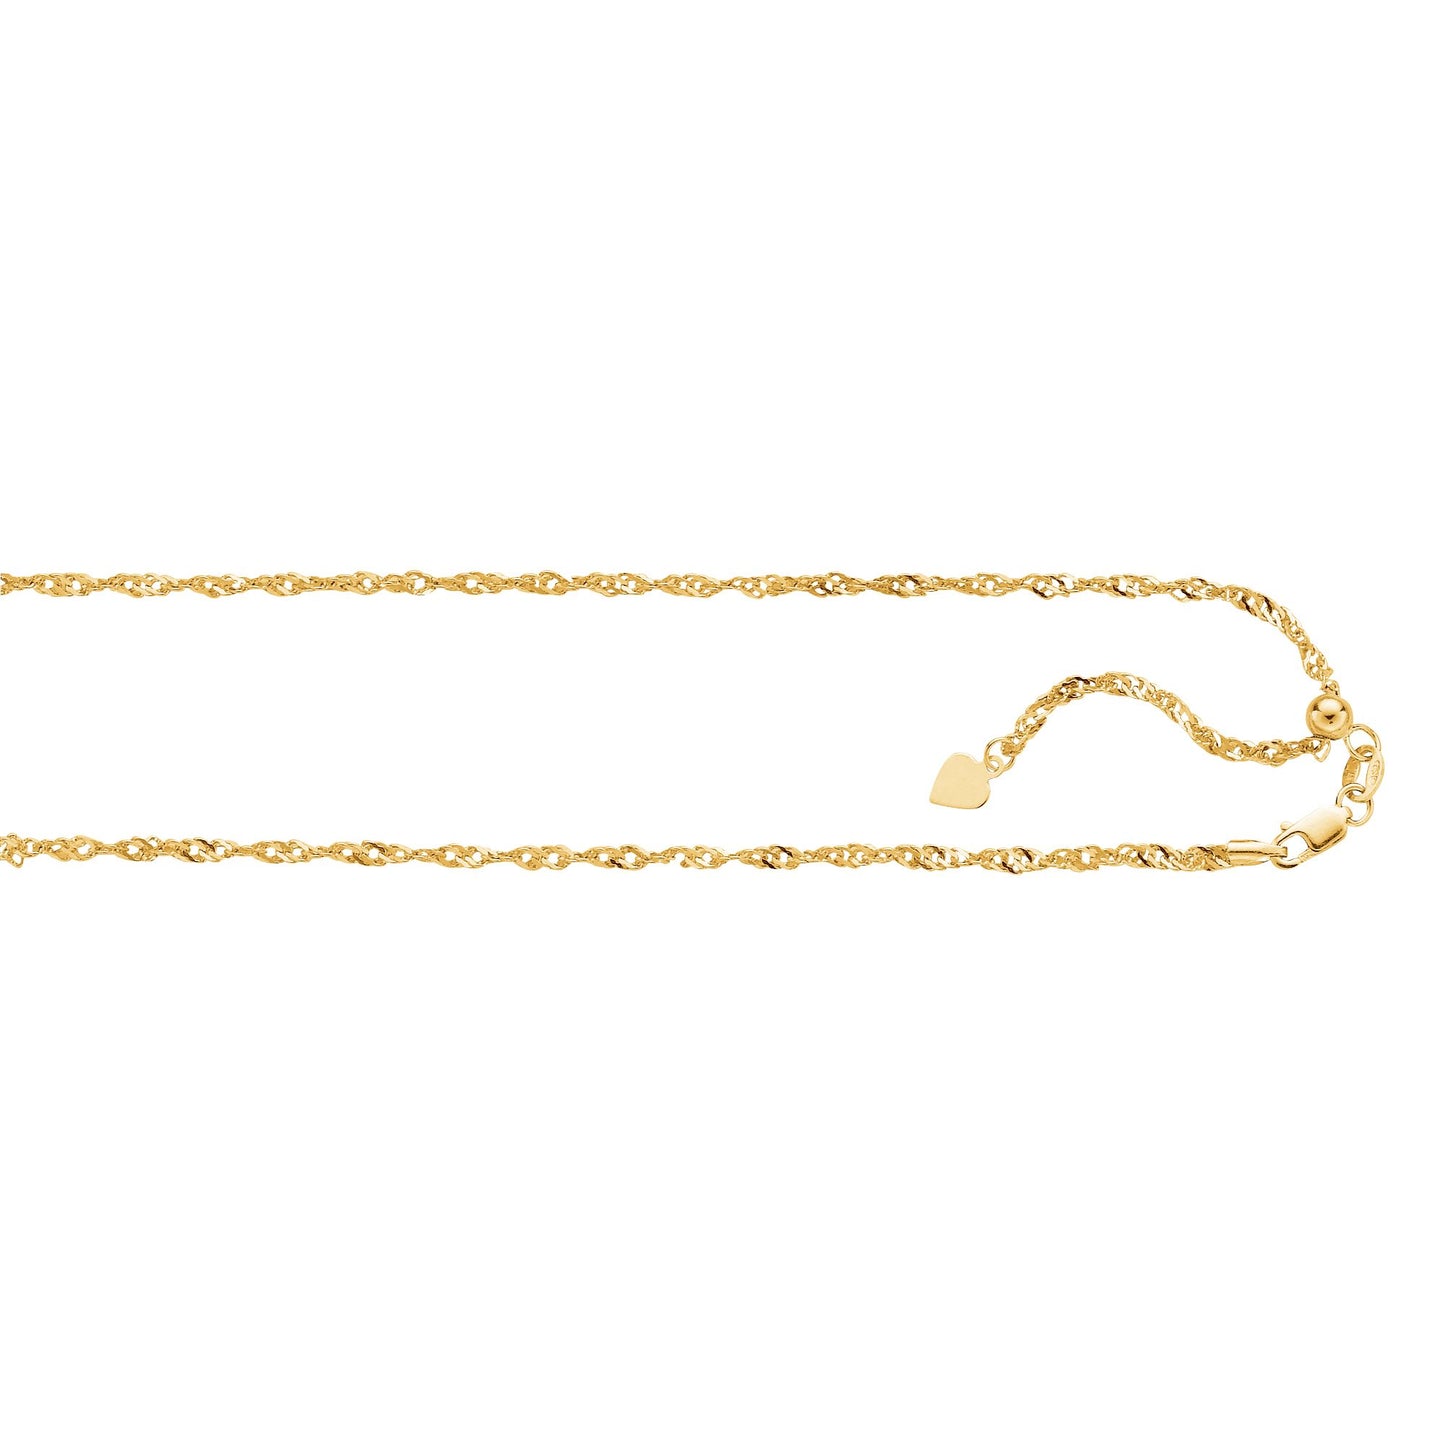 14K Gold Adjustable Singapore Chain with Lobster Lock